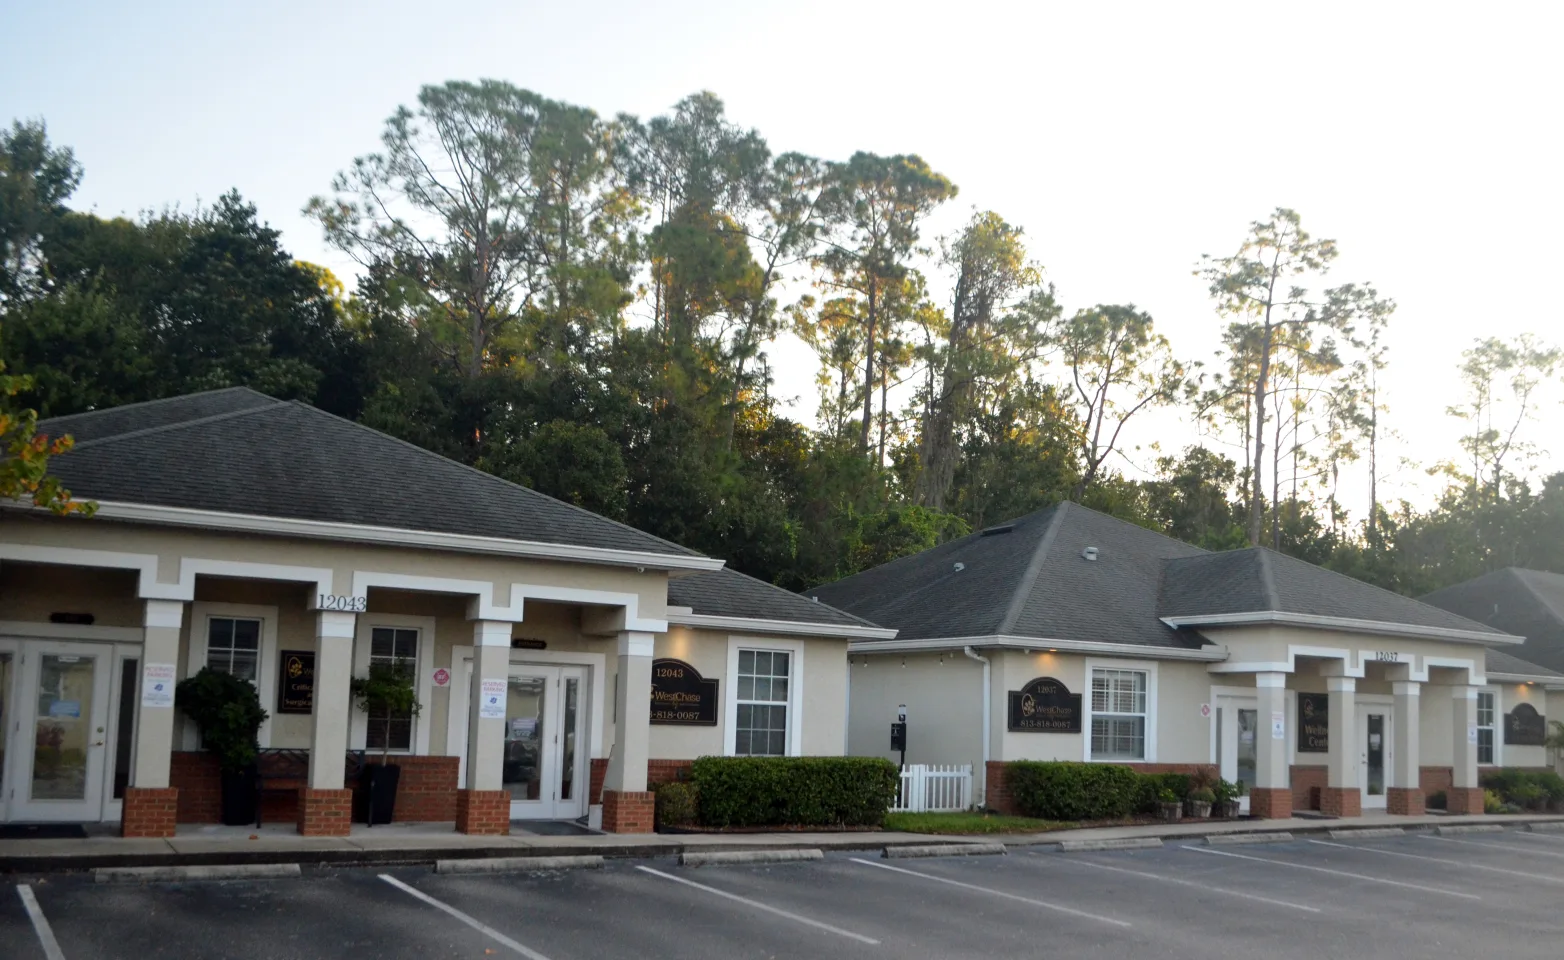 An image of both buildings for Westchase Veterinary Center & Emergency